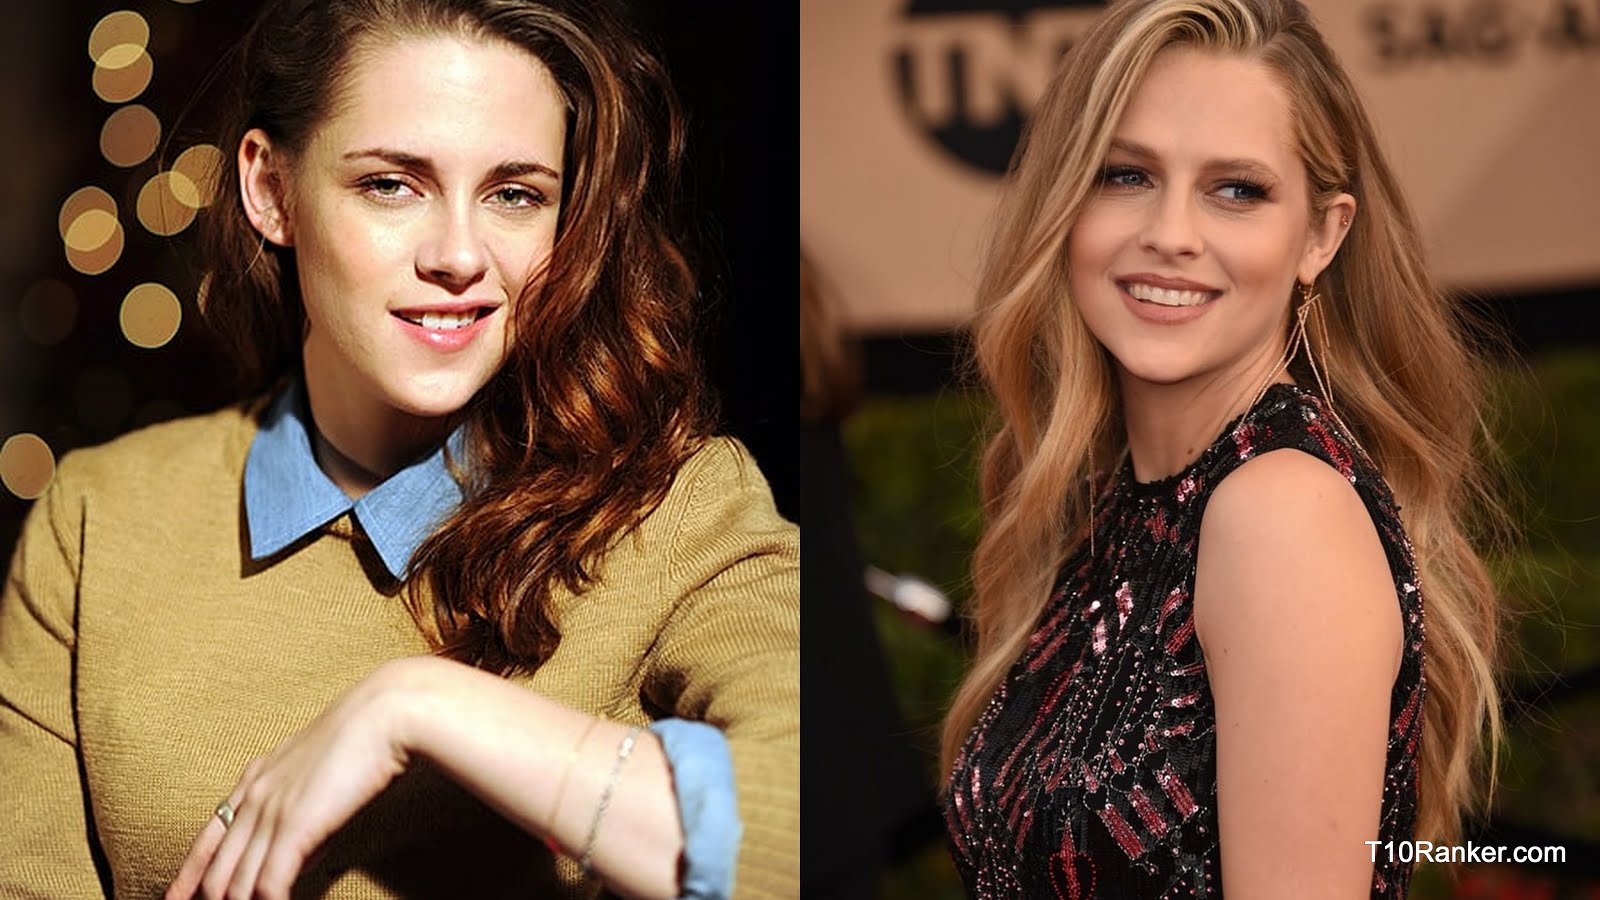 Poll: Teresa Palmer vs Kristen Stewart: Who is the Most Hottest & Sexie...